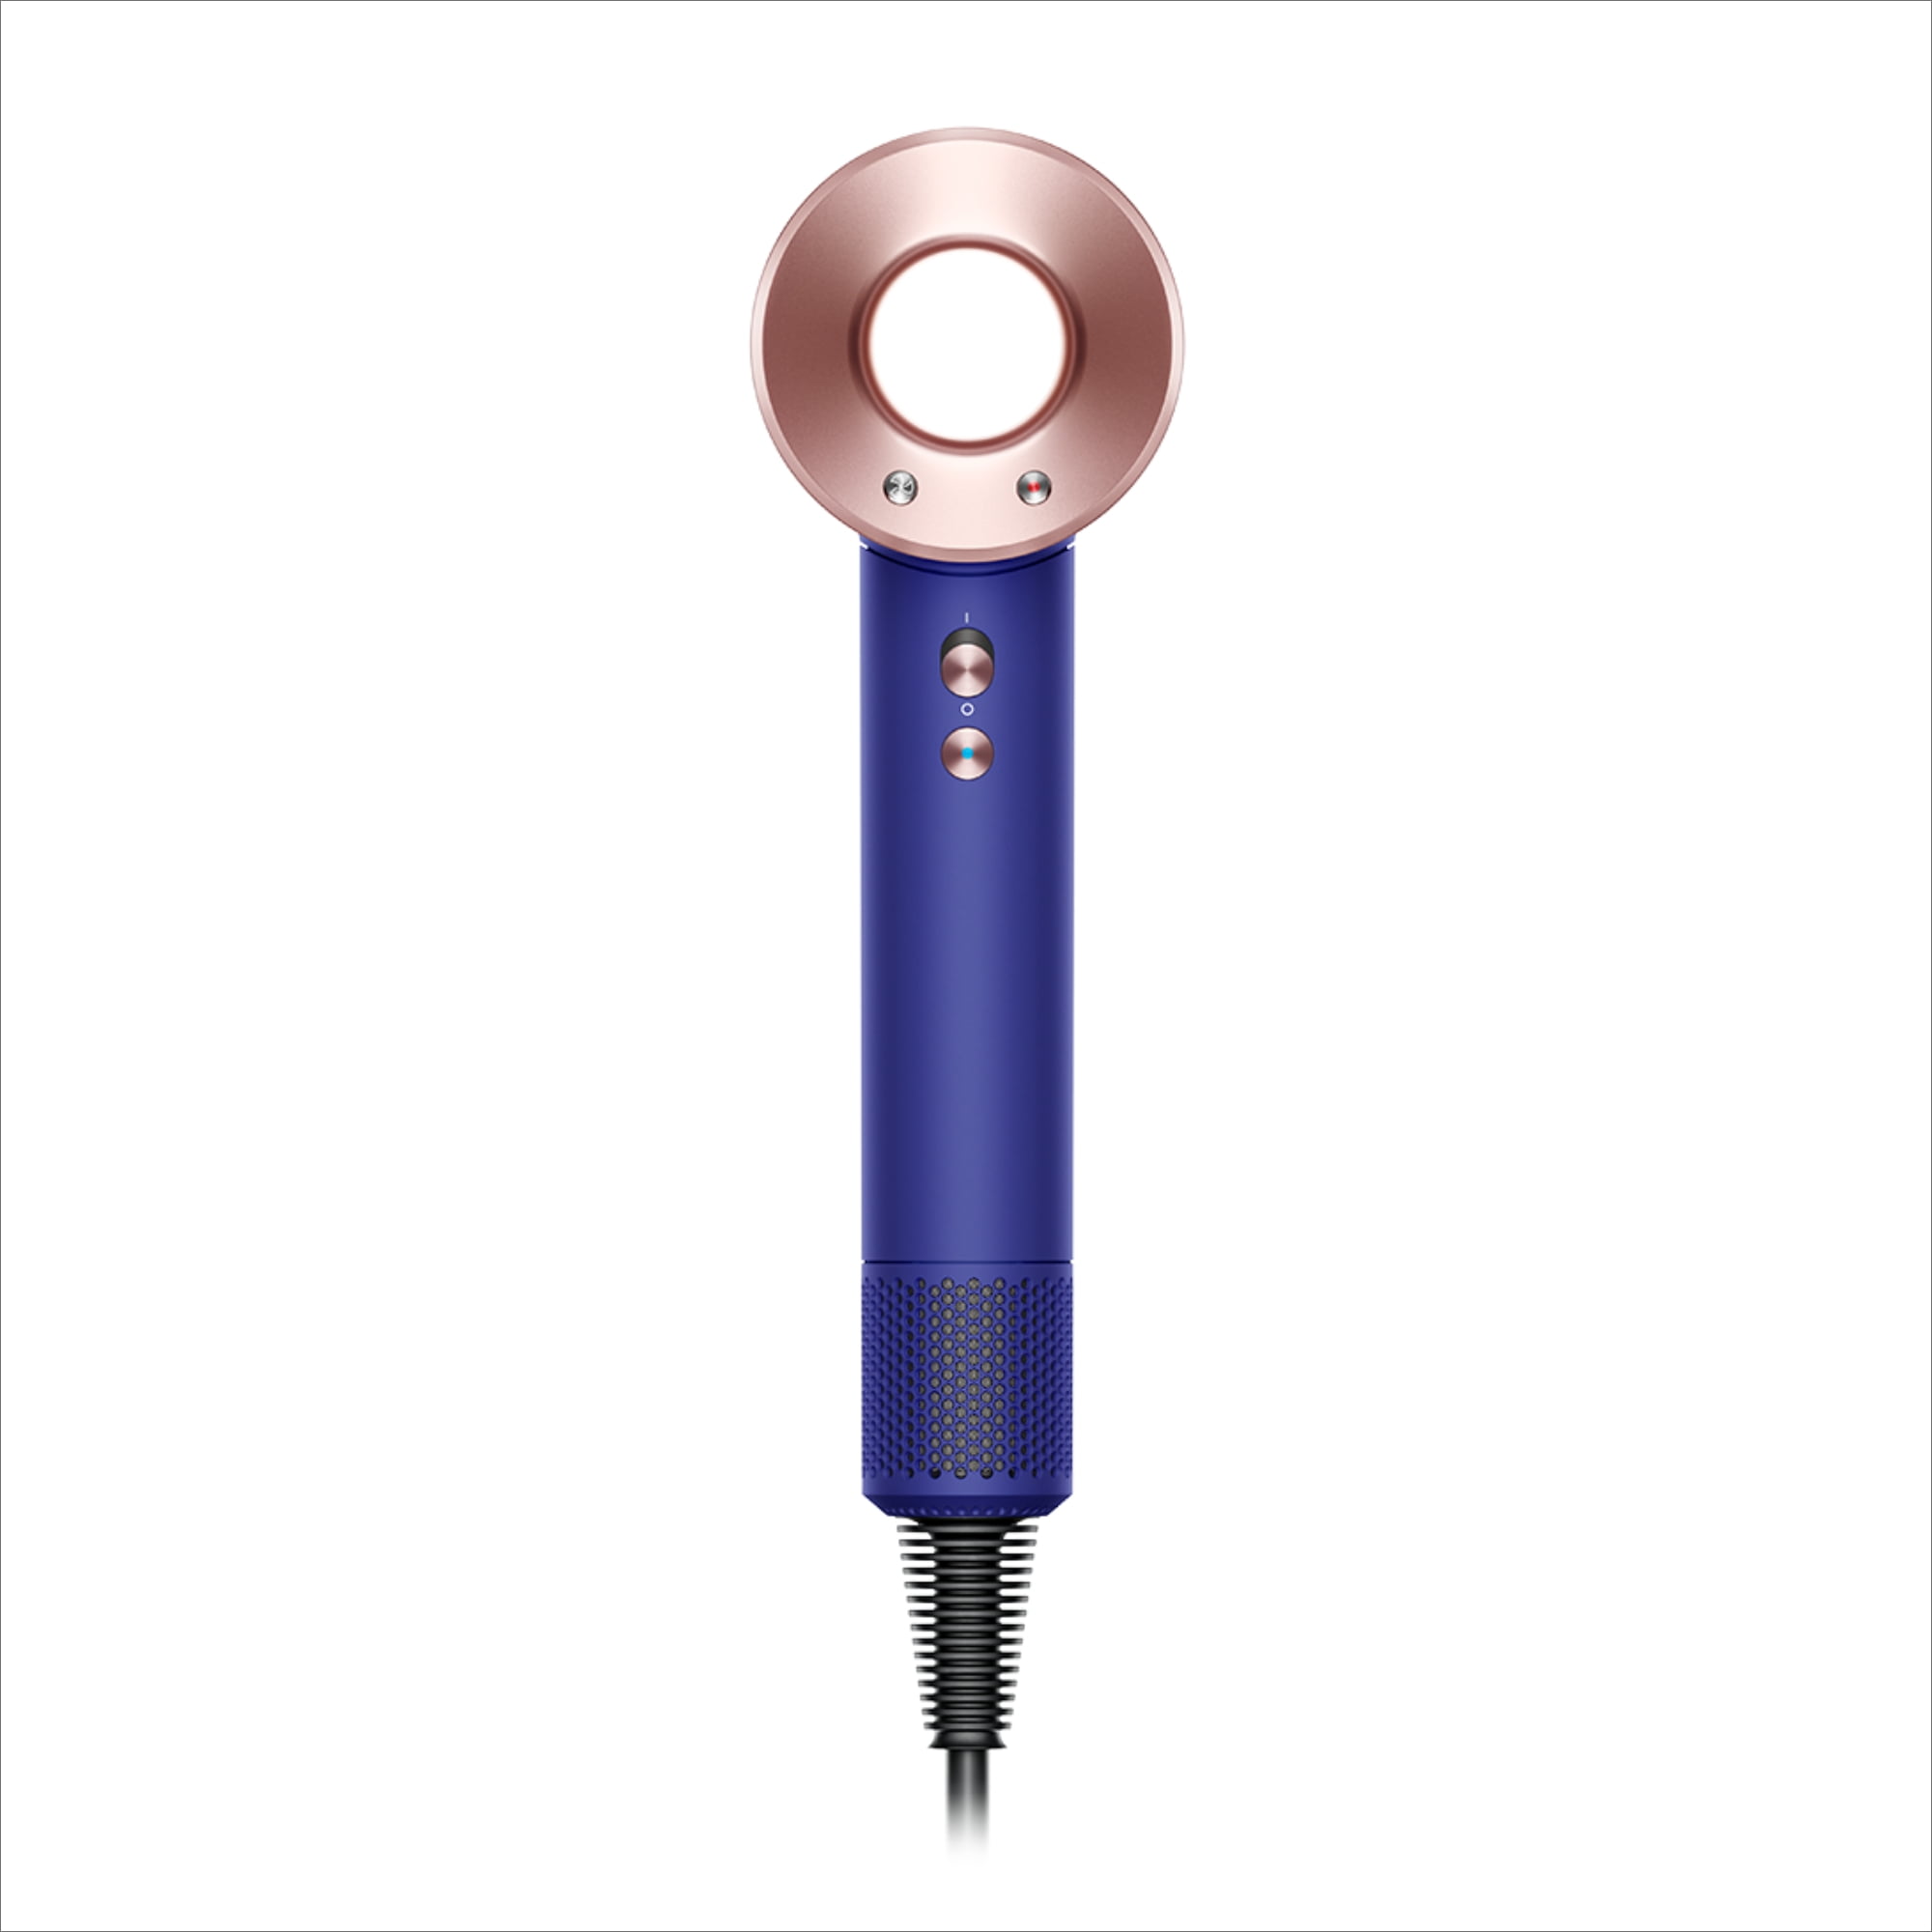 Dyson Supersonic Hair Dryer (Refurbished) $230